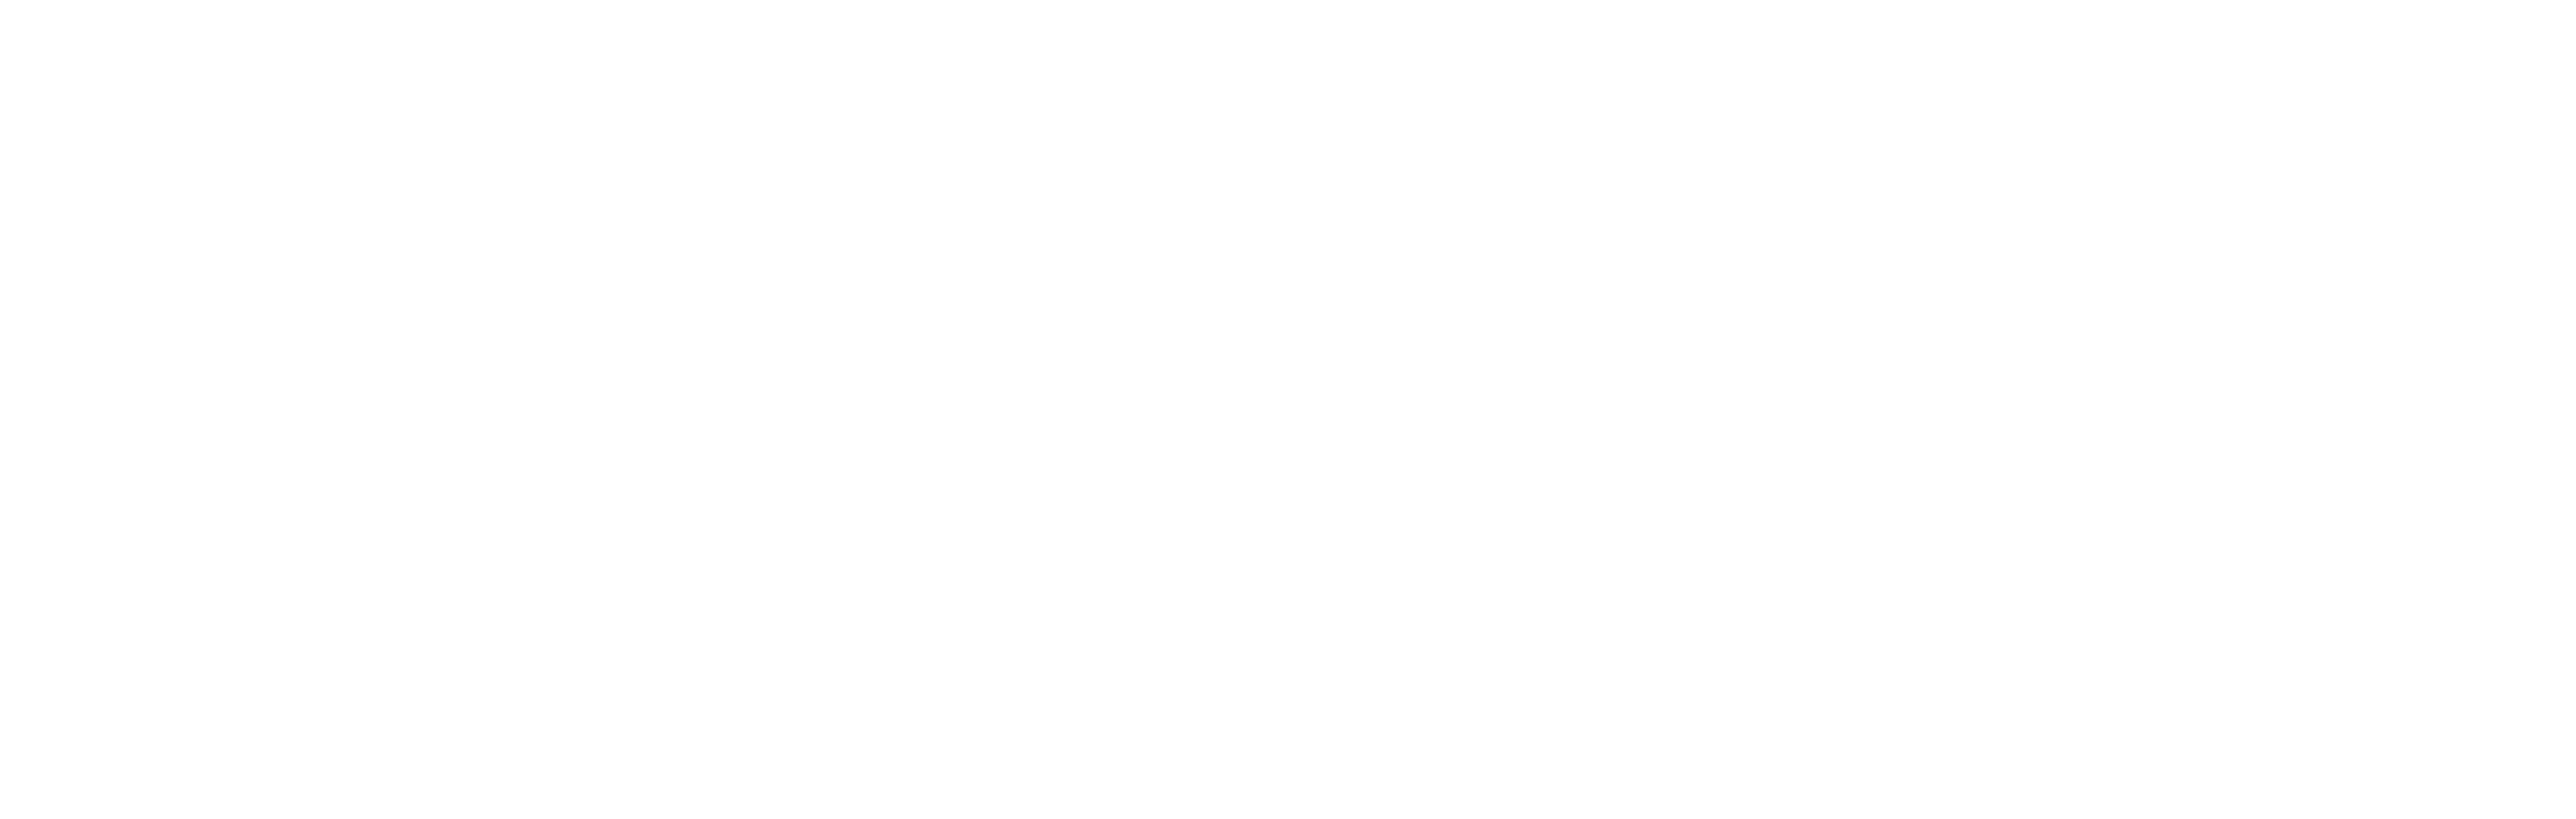 the Stockton young people's logo in white